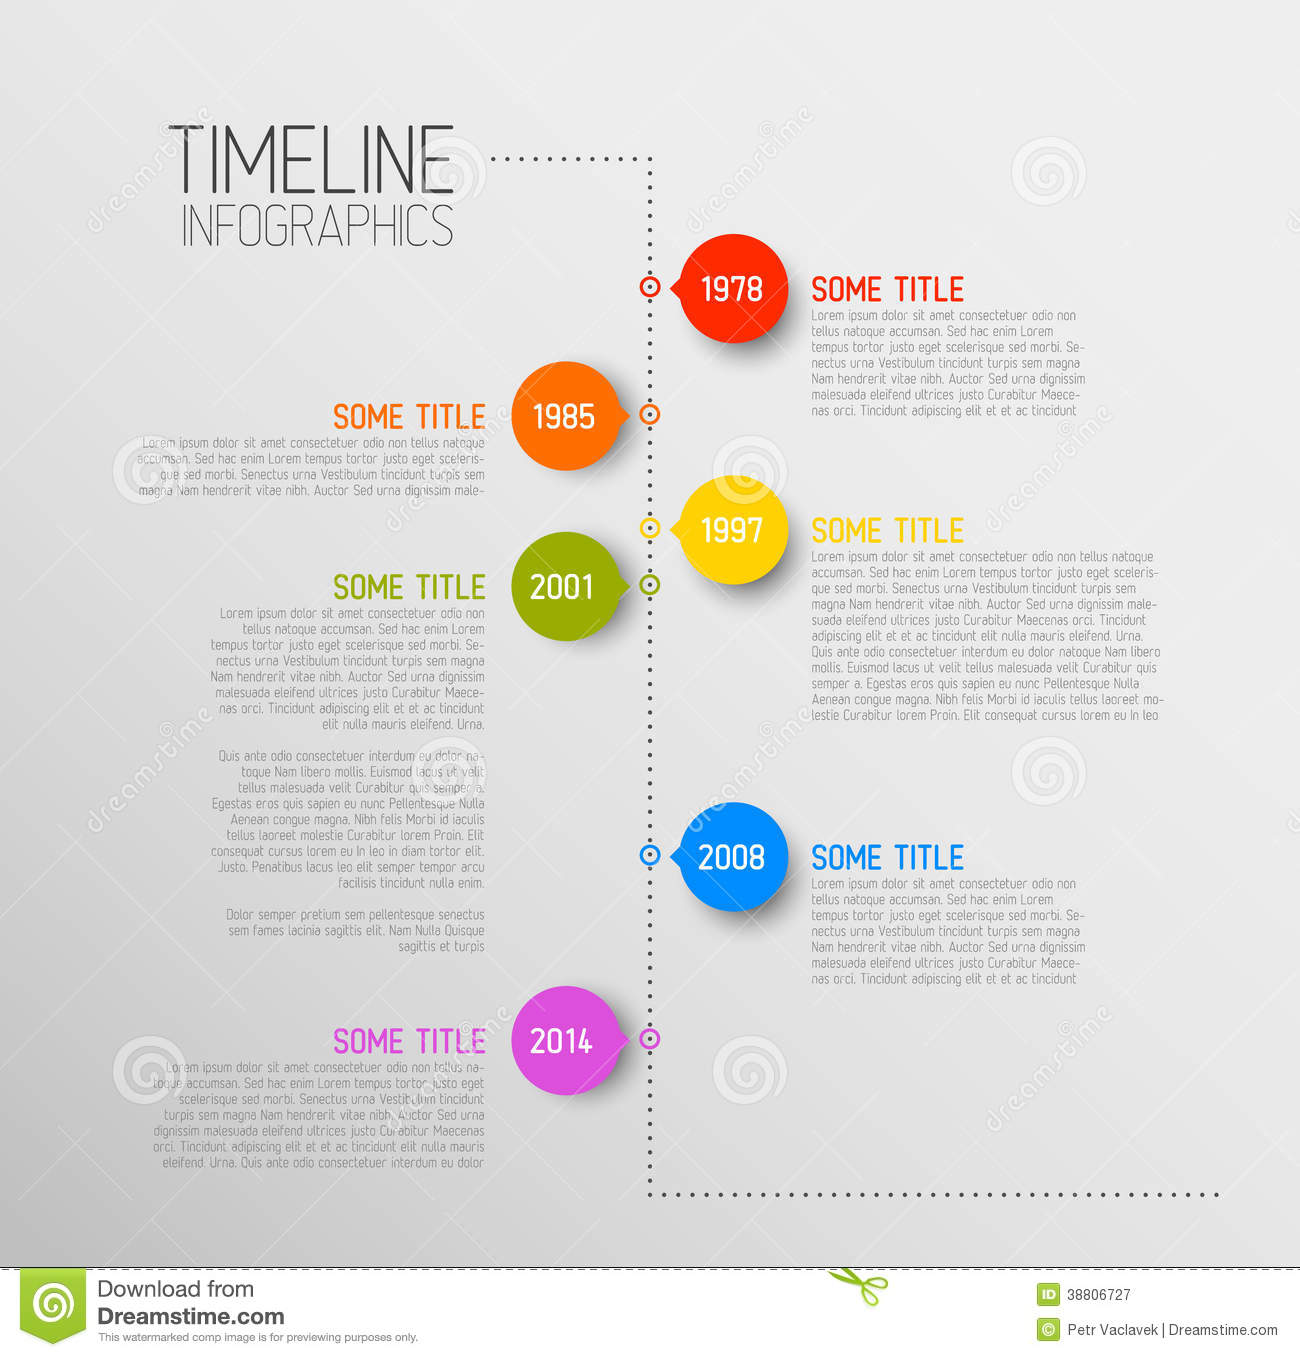 12 Free Timeline Infographic Images